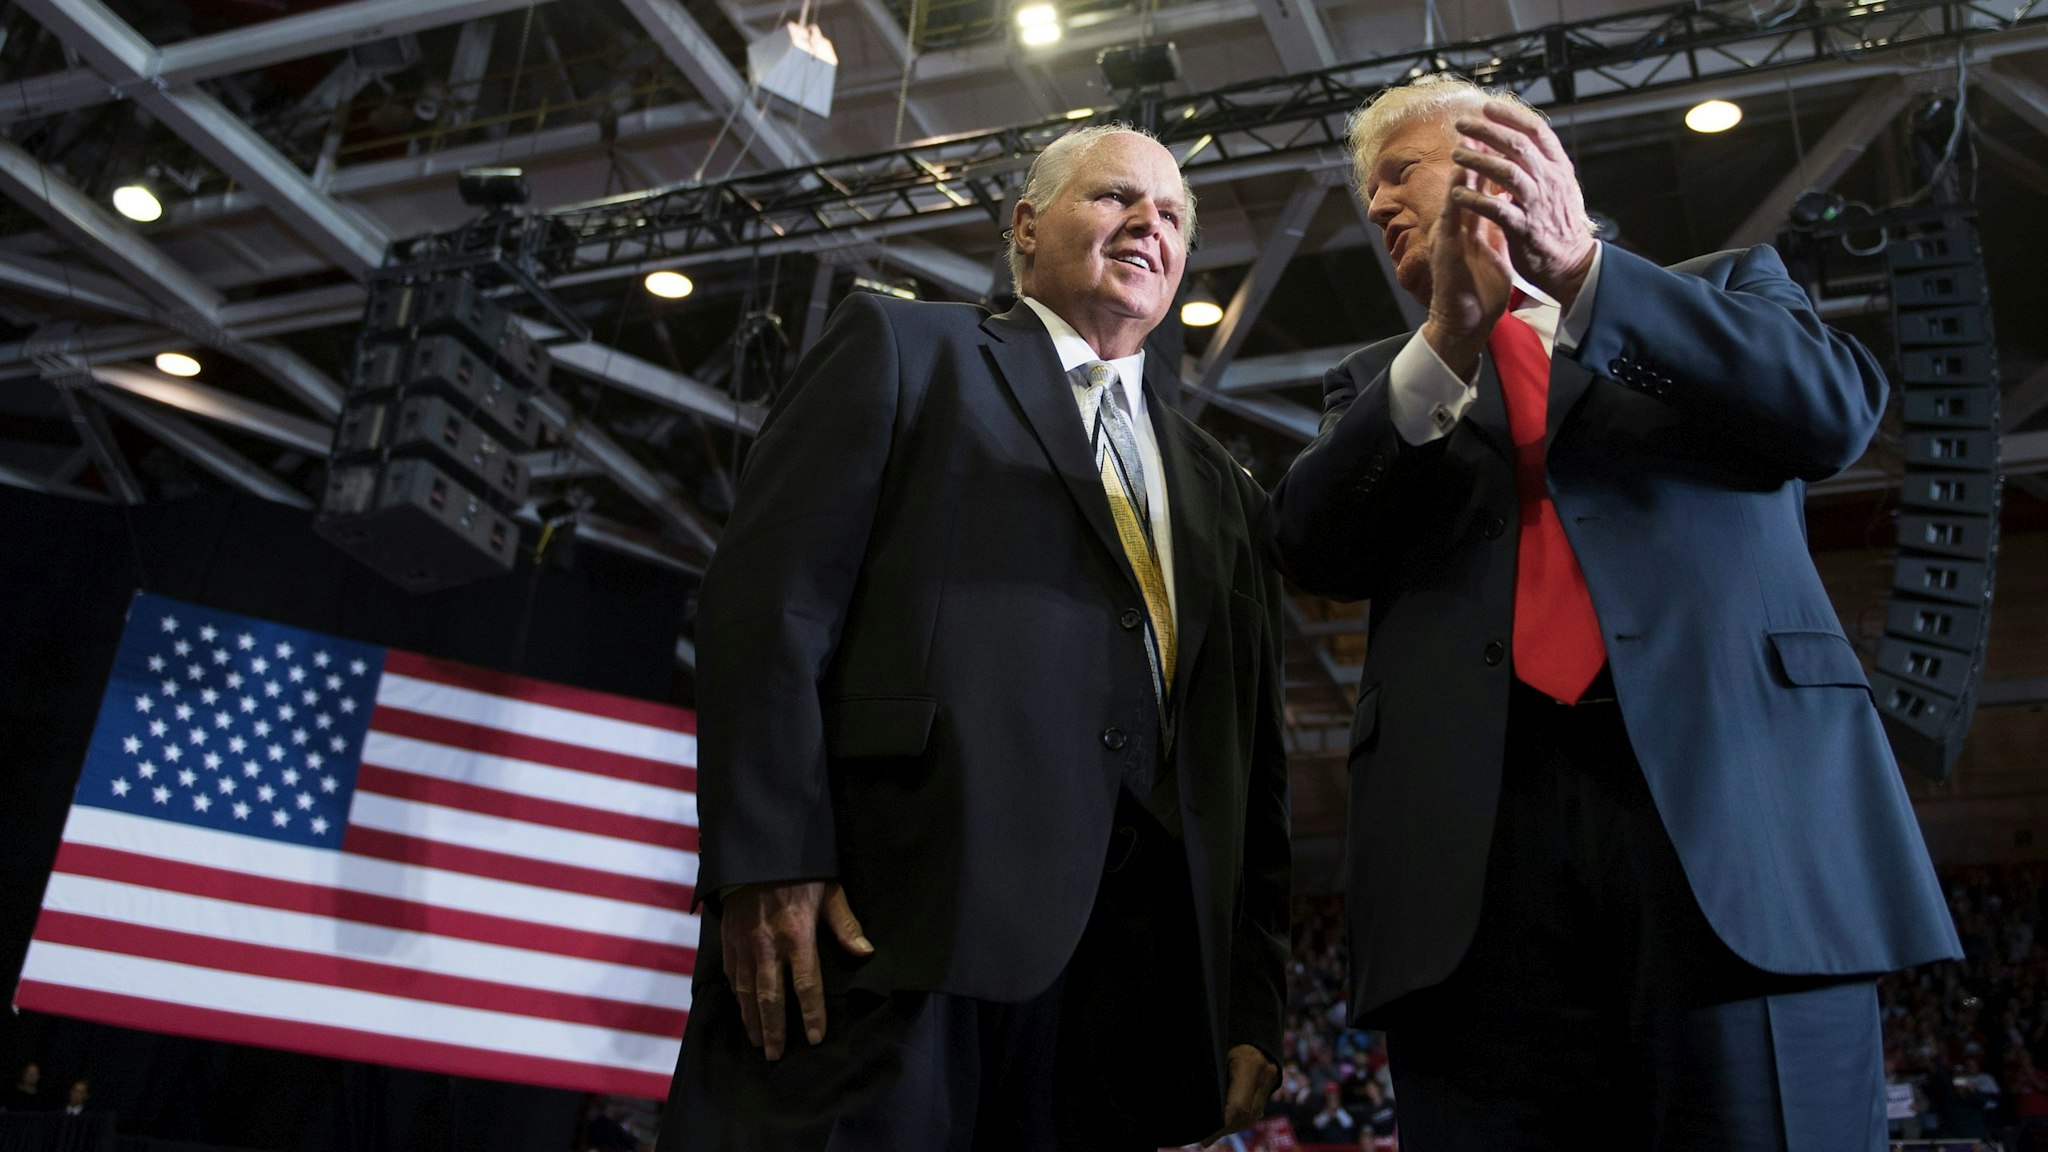 US President Donald Trump alongside radio talk show host Rush Limbaugh arrive at a Make America Great Again rally in Cape Girardeau, Missouri on November 5, 2018. (Photo by Jim WATSON / AFP) (Photo credit should read JIM WATSON/AFP via Getty Images)